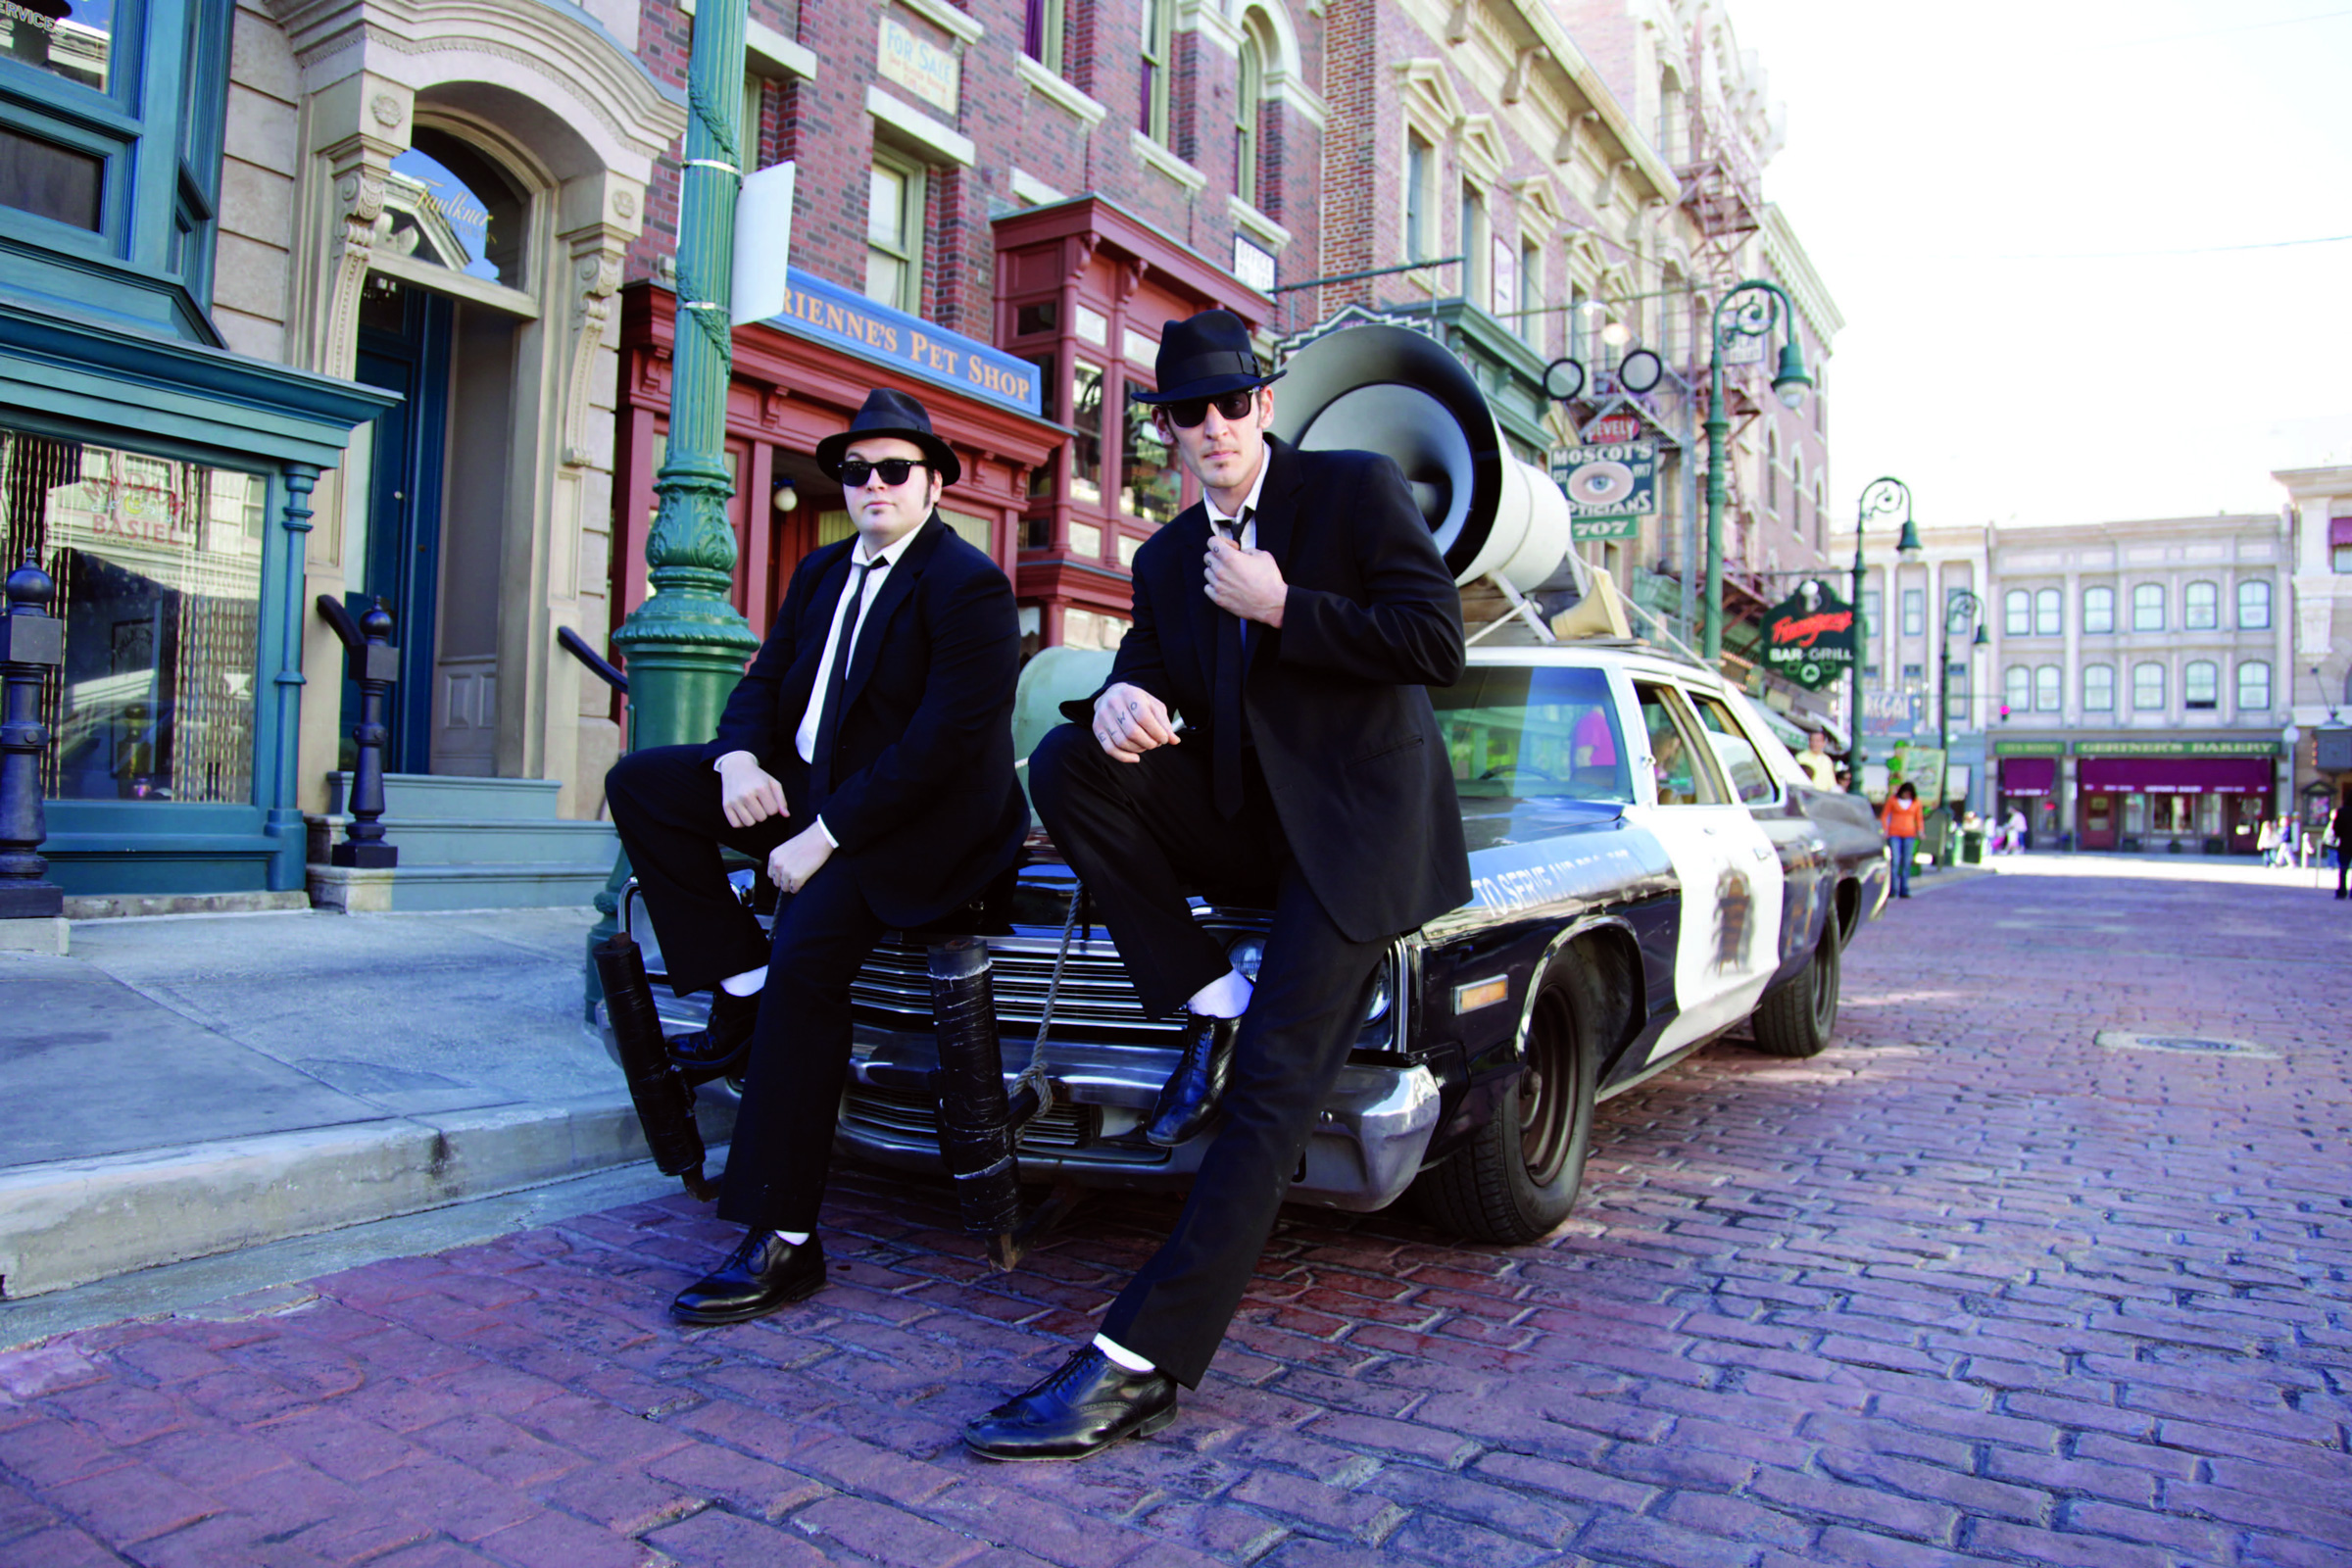 The Blues Brothers Show at Universal Orlando World of Universal